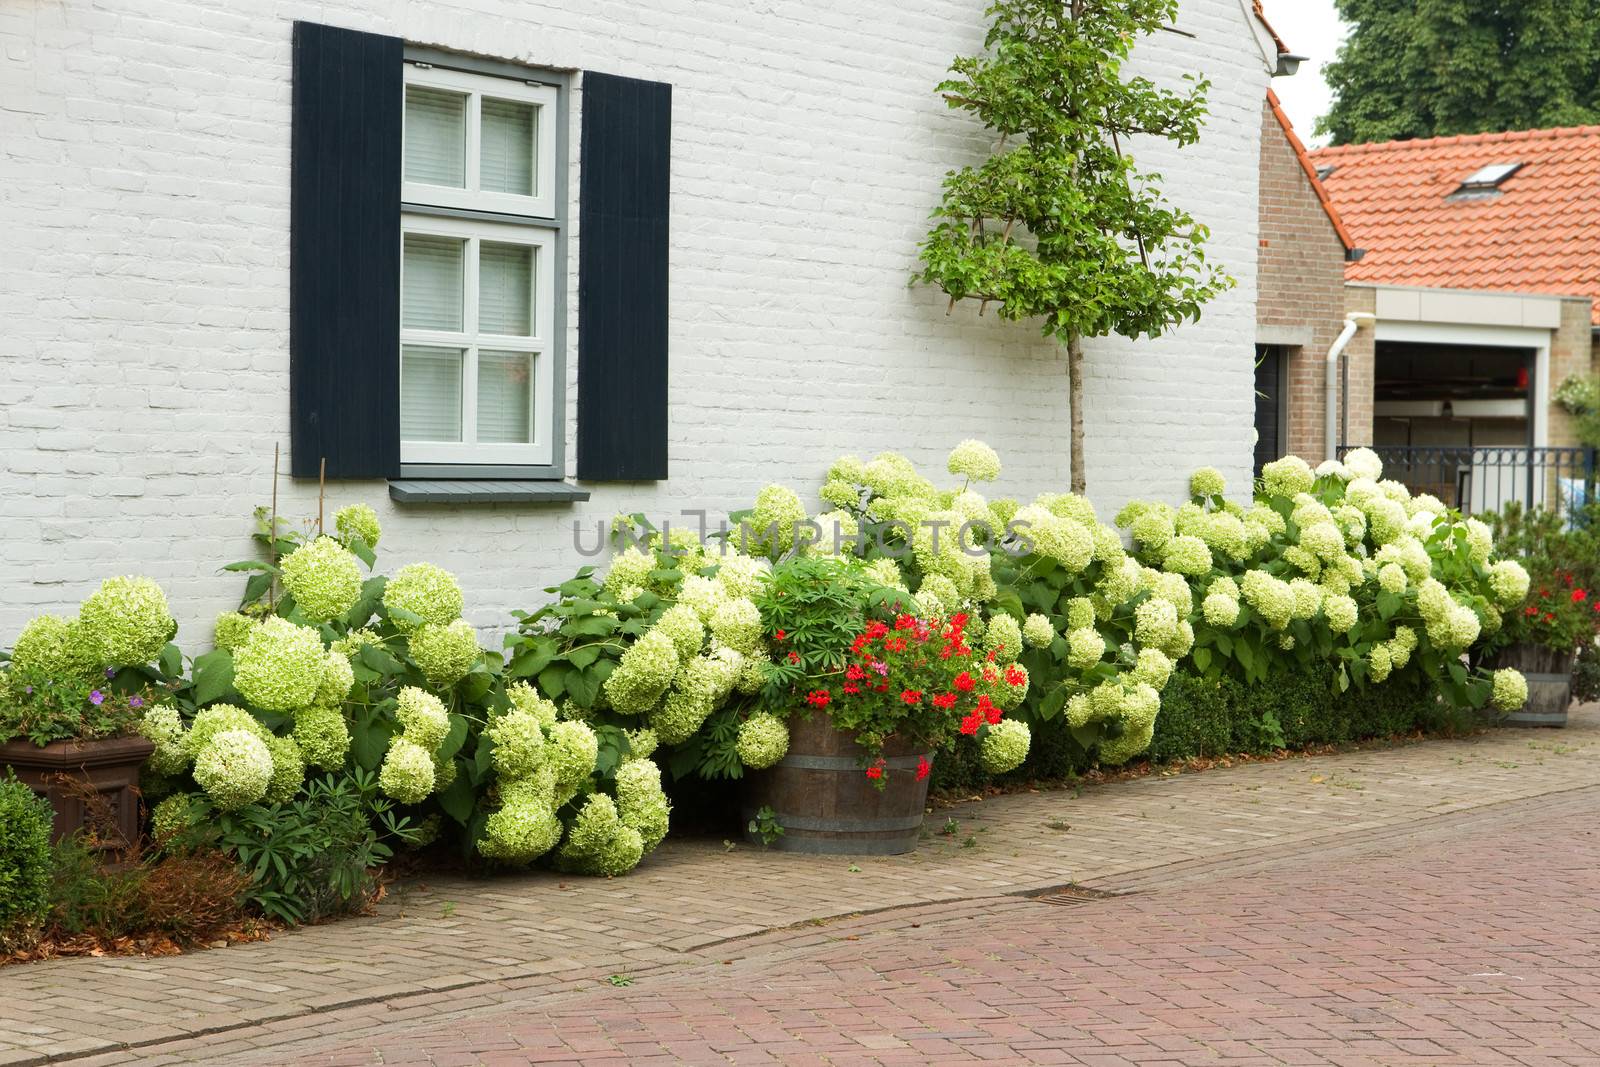 House with Hydrangea flowers in summer by Colette